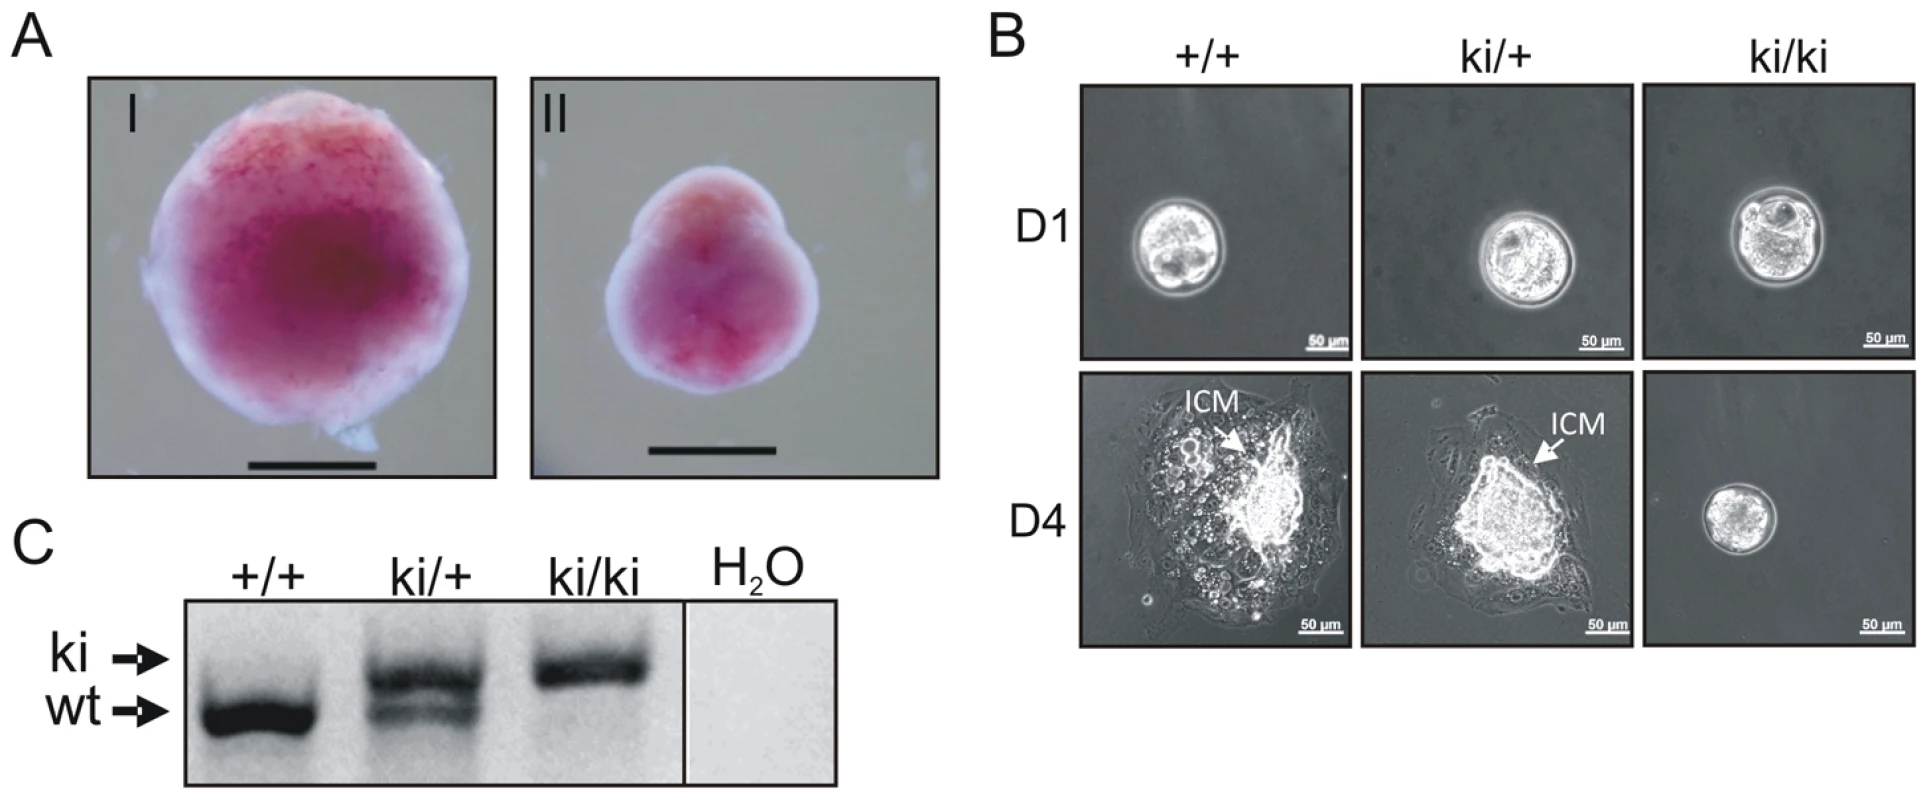 Inactivation of the AAD results in early embryonic developmental defects.